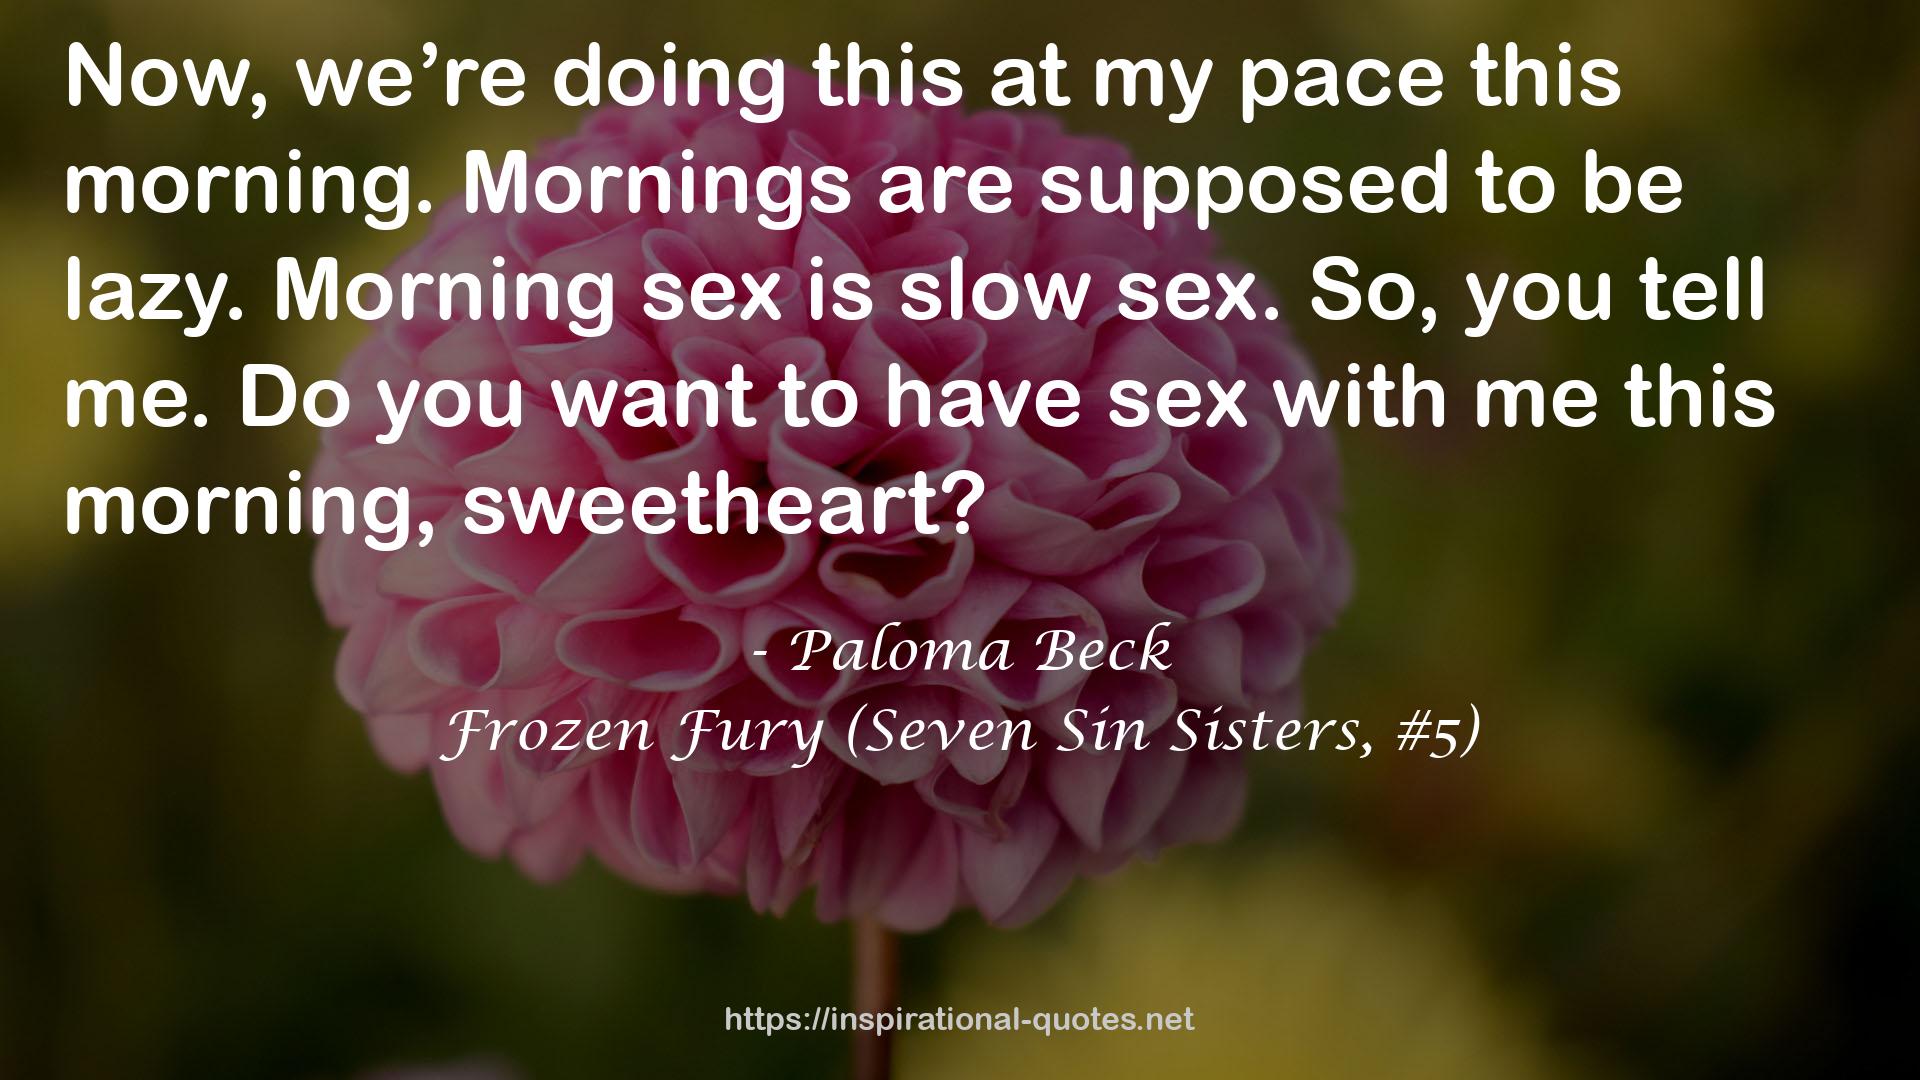 Frozen Fury (Seven Sin Sisters, #5) QUOTES